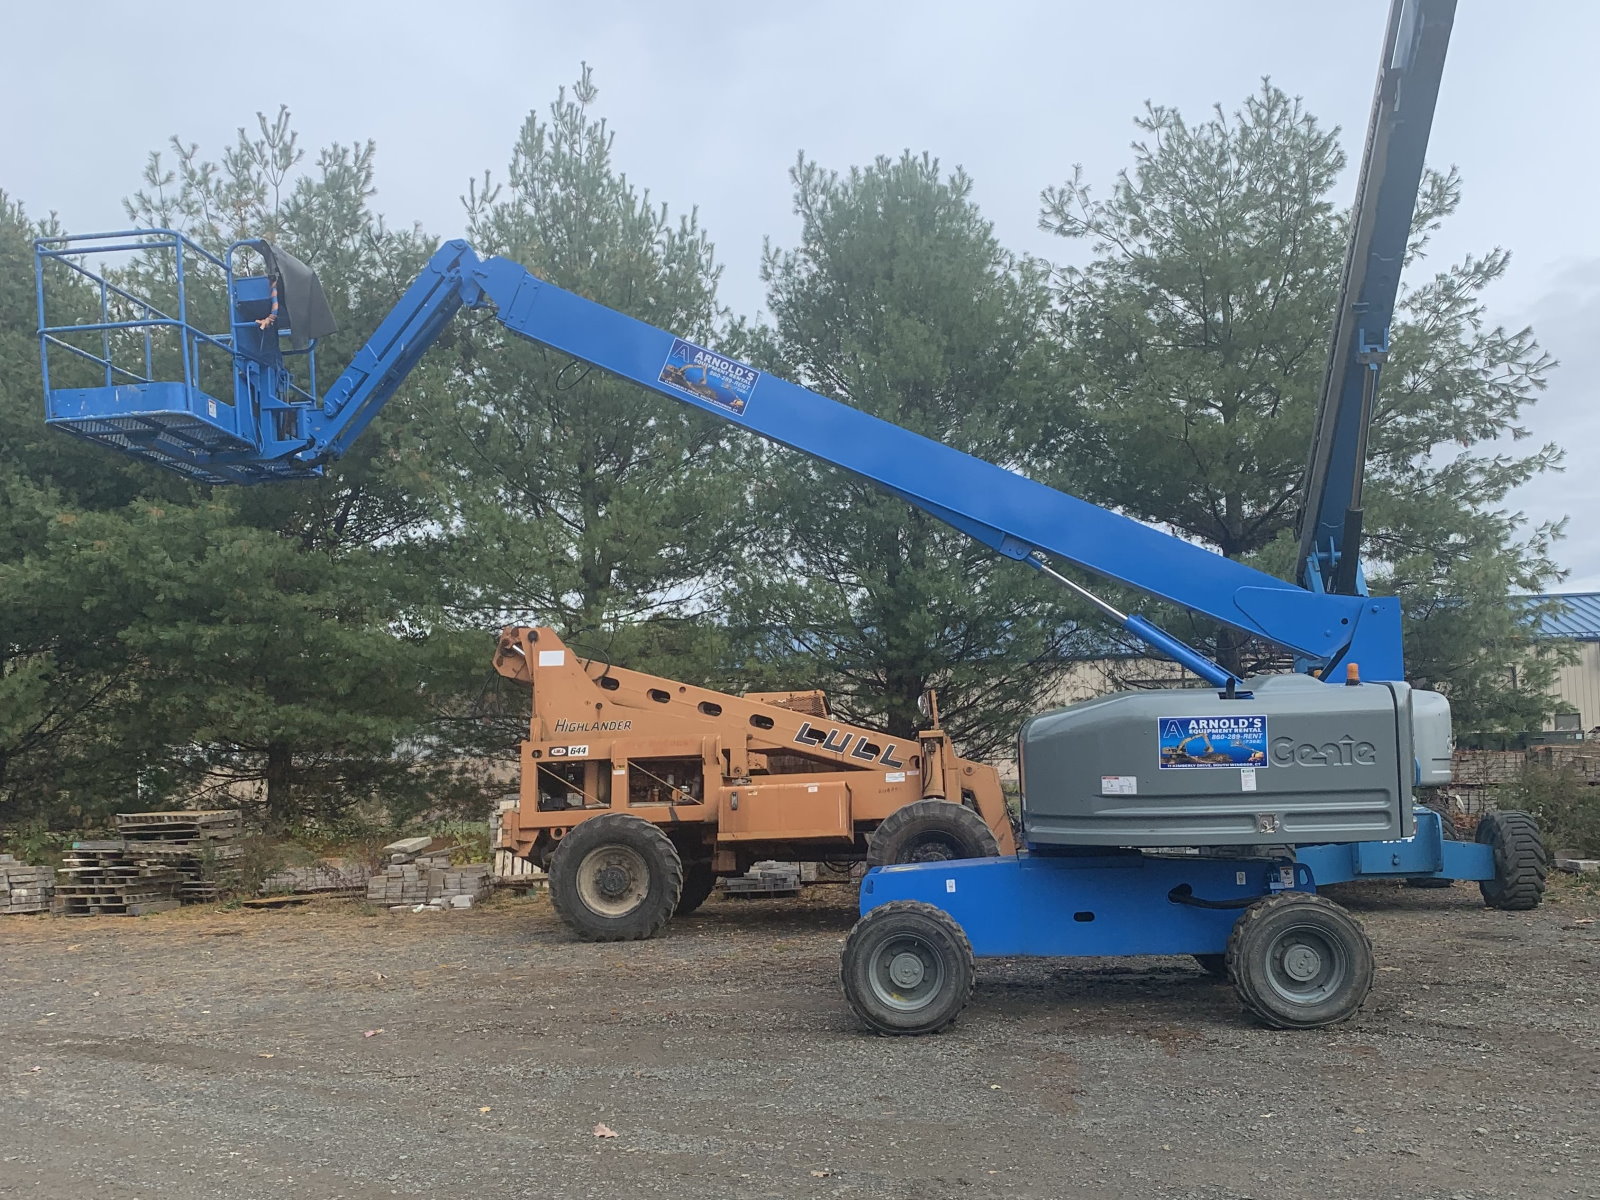 Genie S45 Telescopic Boom Lift For Rent in CT